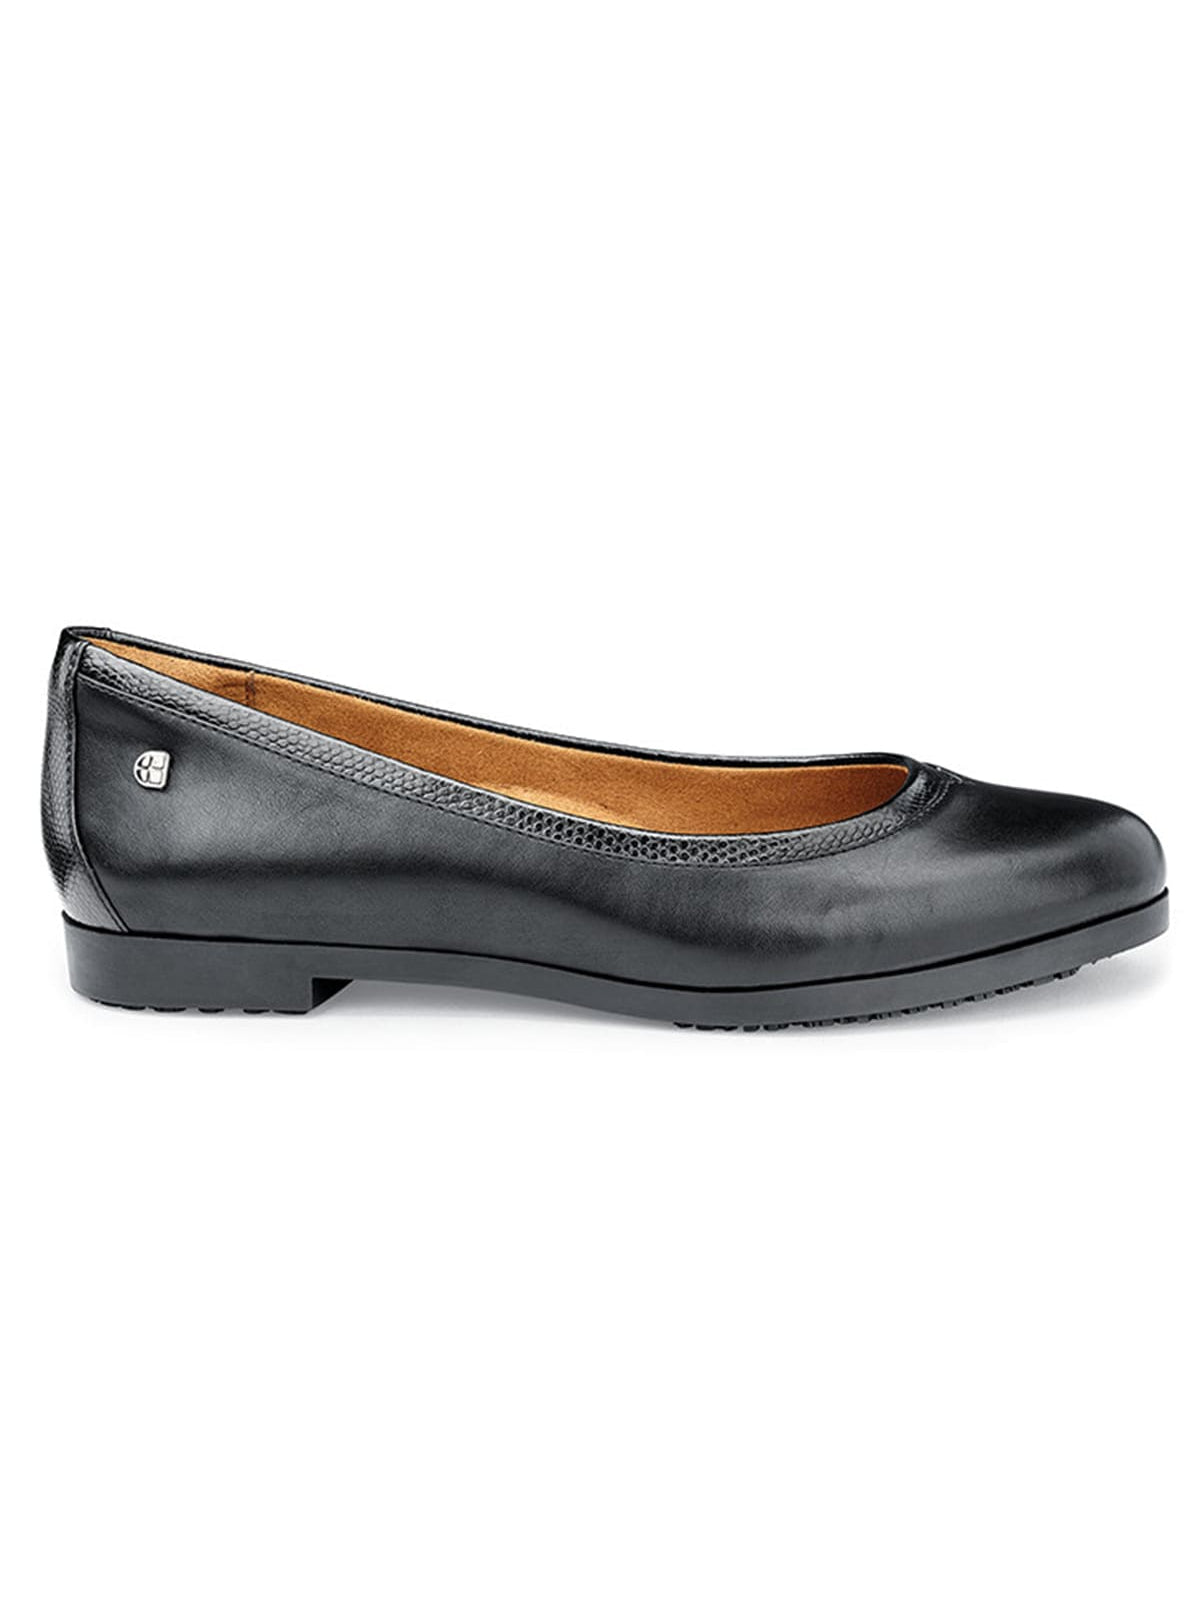 Women's Work Shoe Reese by Shoes For Crews -  ChefsCotton